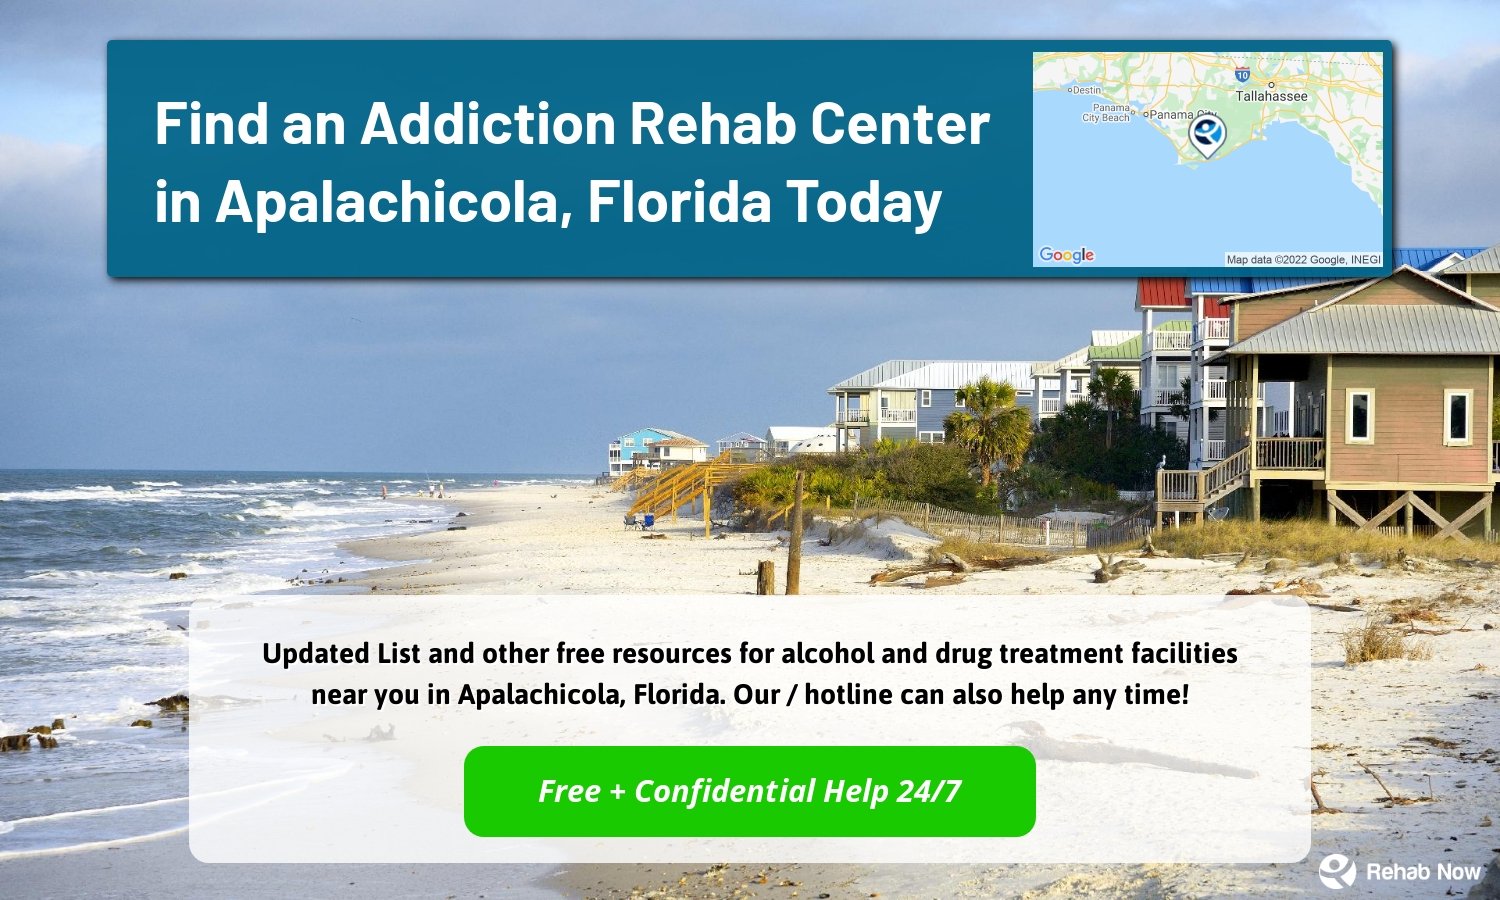  Updated List and other free resources for alcohol and drug treatment facilities near you in Apalachicola, Florida. Our / hotline can also help any time!